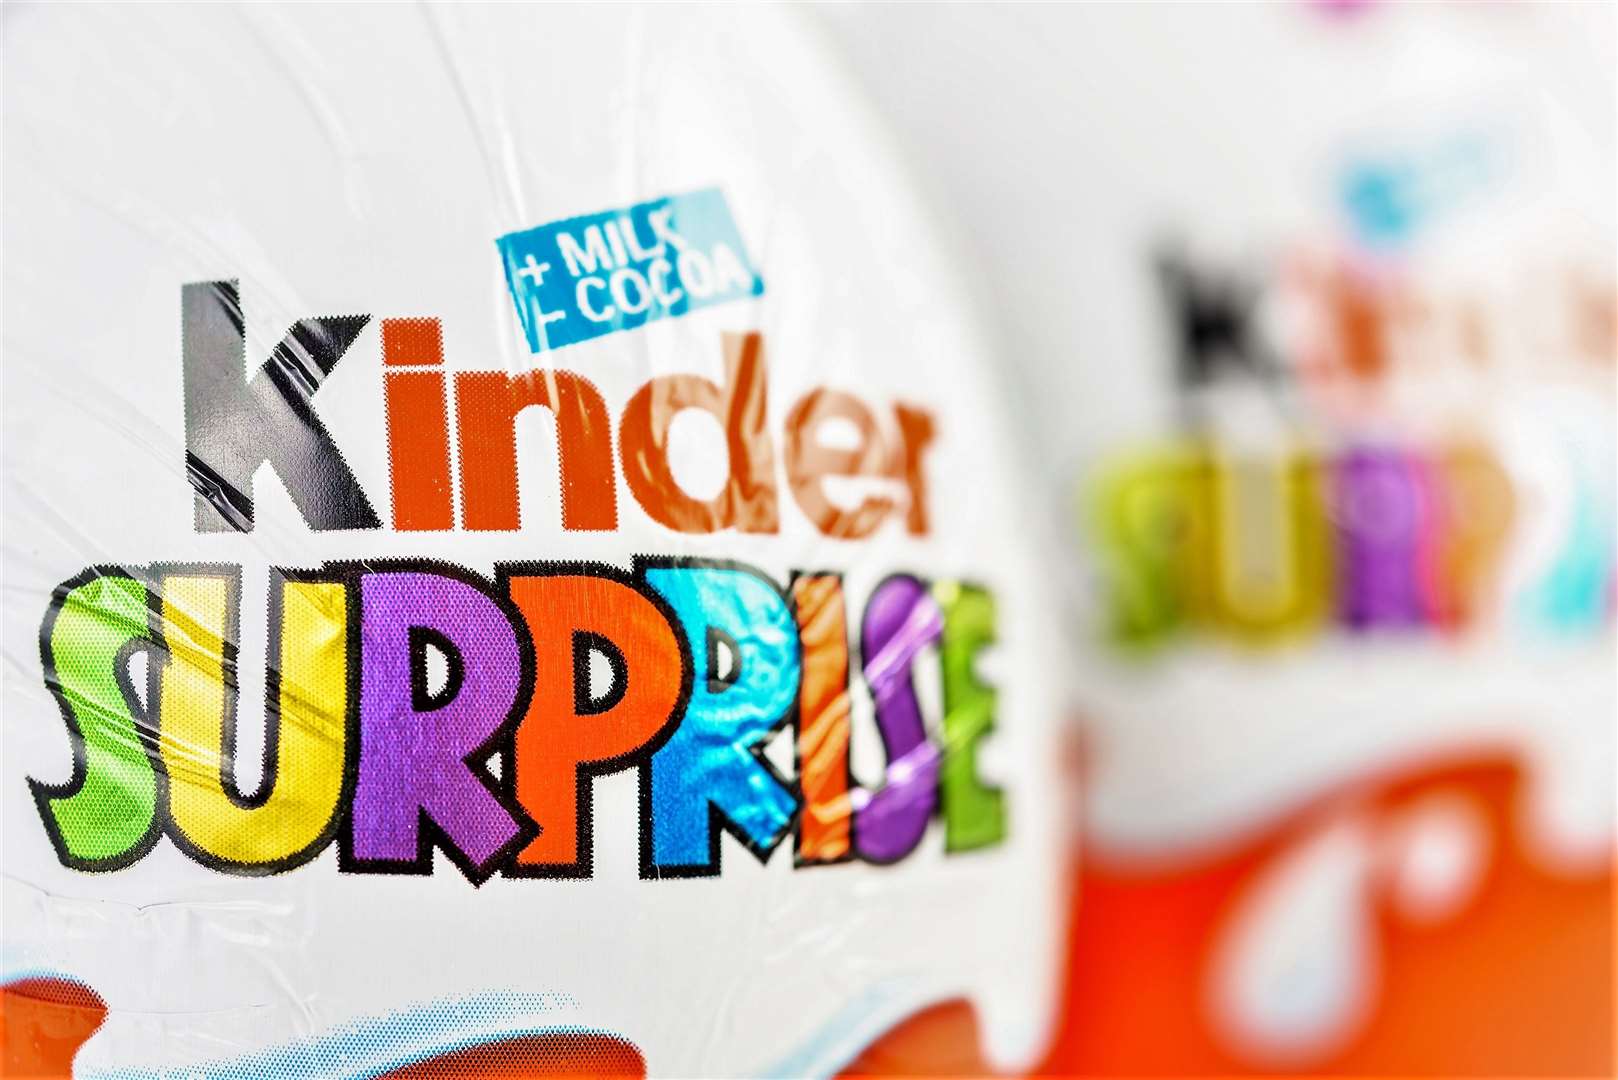 Kinder Surprise Chocolate Eggs are a confection manufactured by Ferrero company and has the form of a chocolate egg containing a small toy.